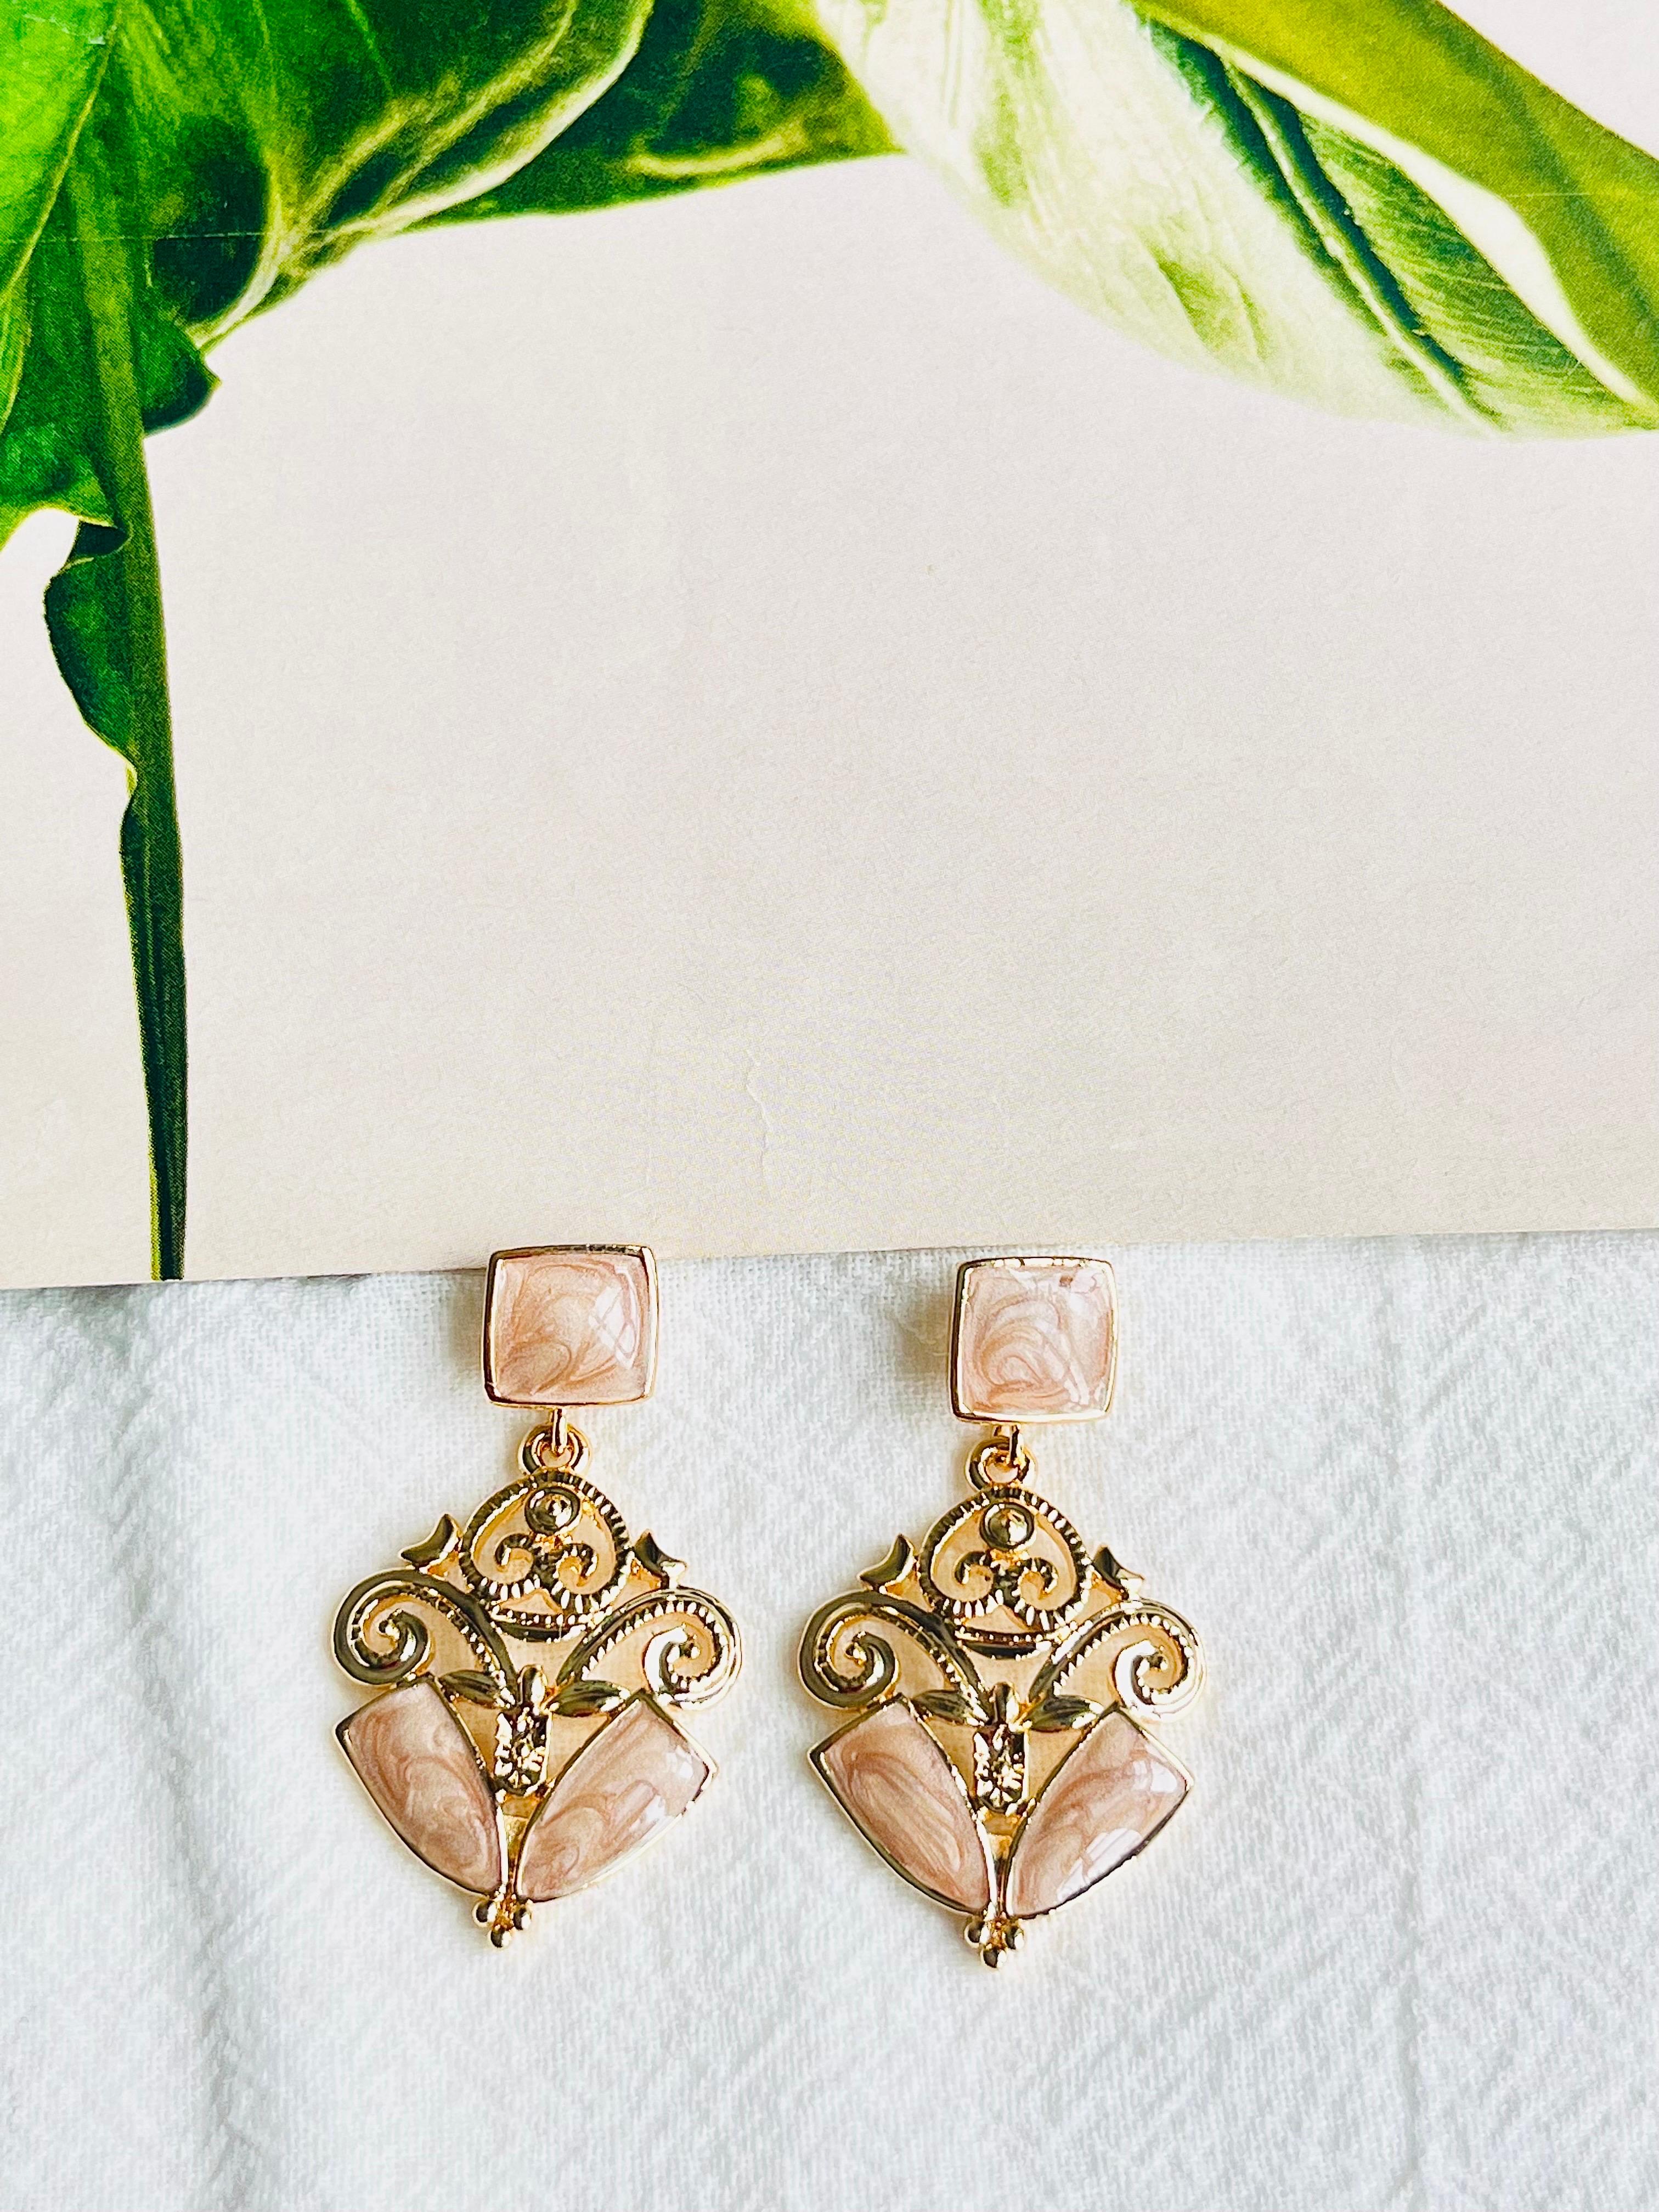 Baroque Light Pink Square Enamel Relief Openwork Long Drop Pierced Earrings, Gold Tone, Swarovski Element

The cost is very high. 100% handmade. Excellent gift for lady. Fine handcraft.

Material: Gold plated metal, Enamel.

Size: 3.9*2.2